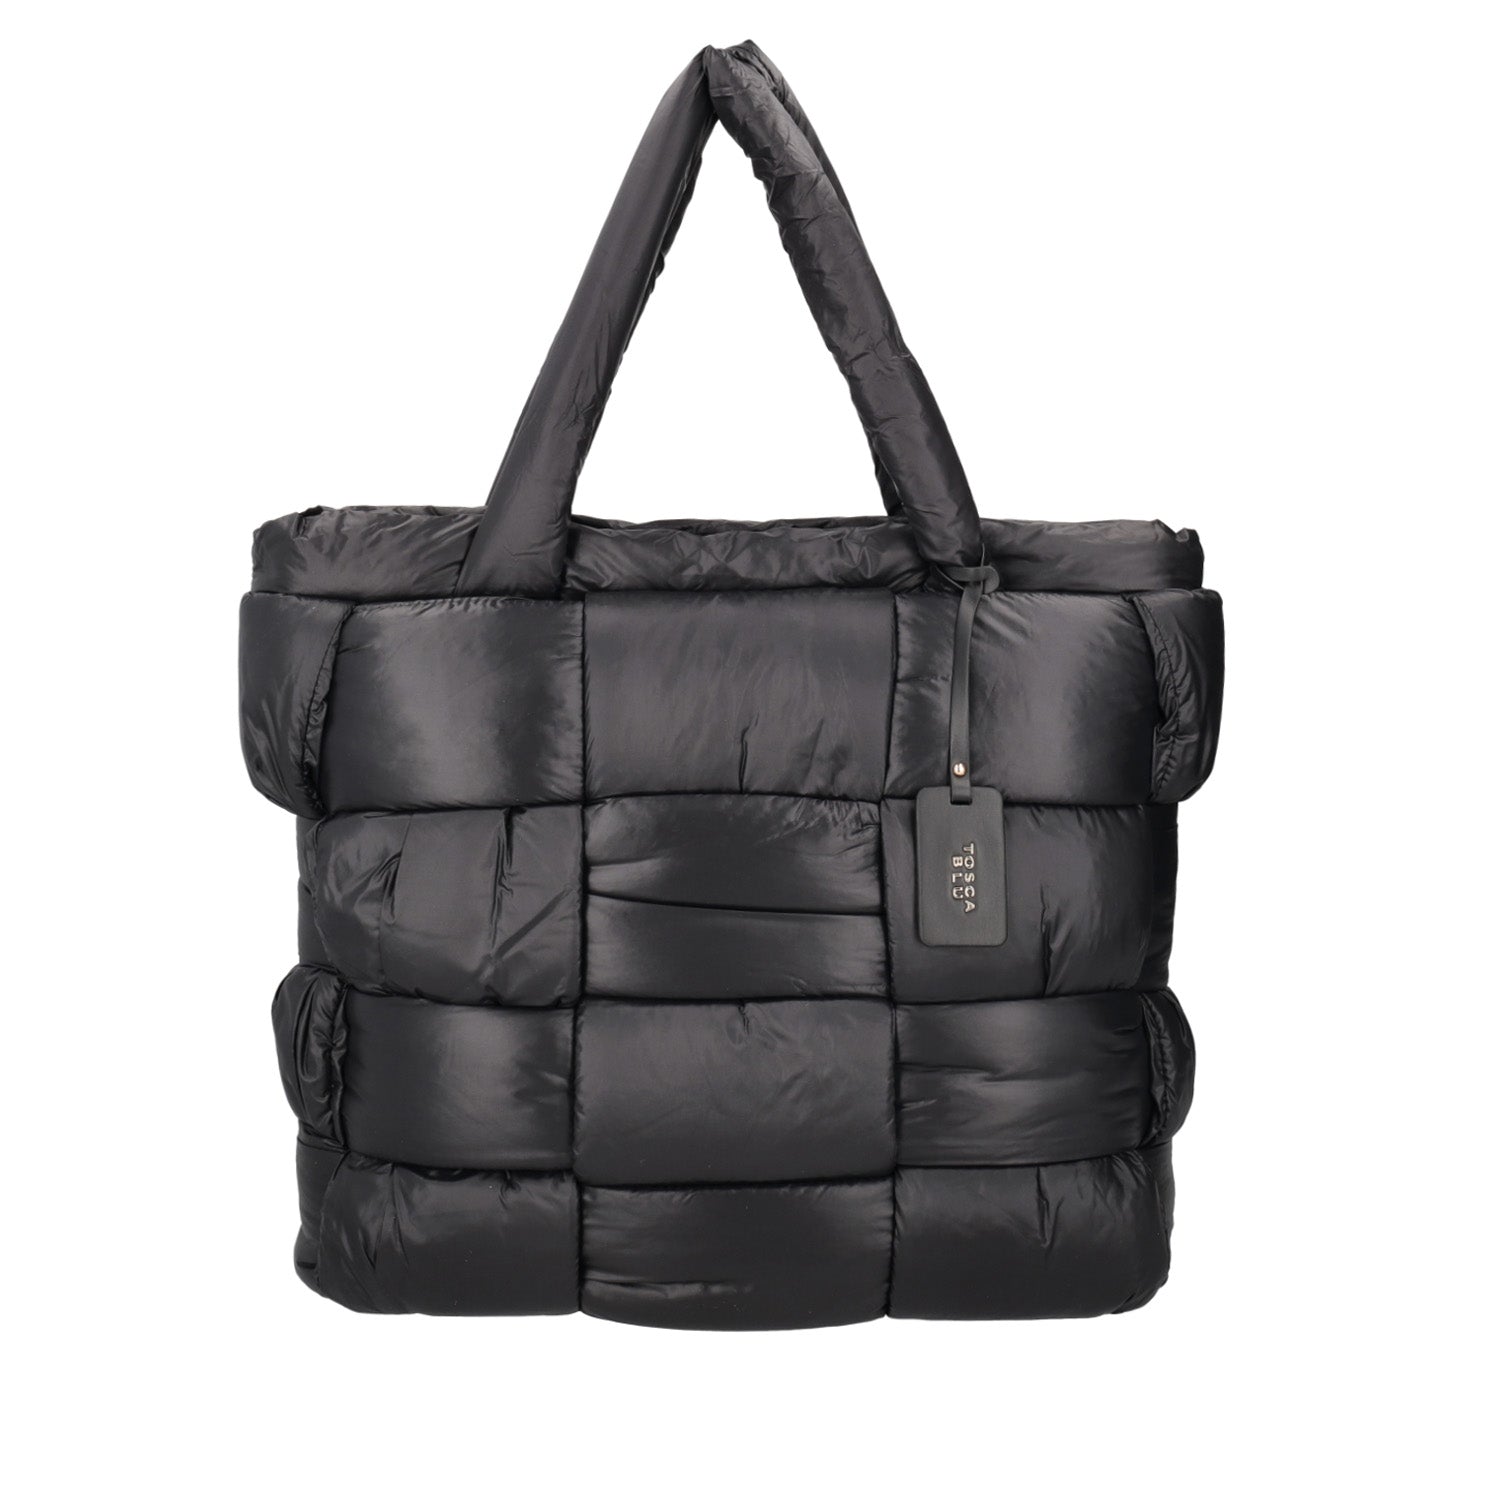 BLACK QUILTED “SHARON” SHOPPING BAG